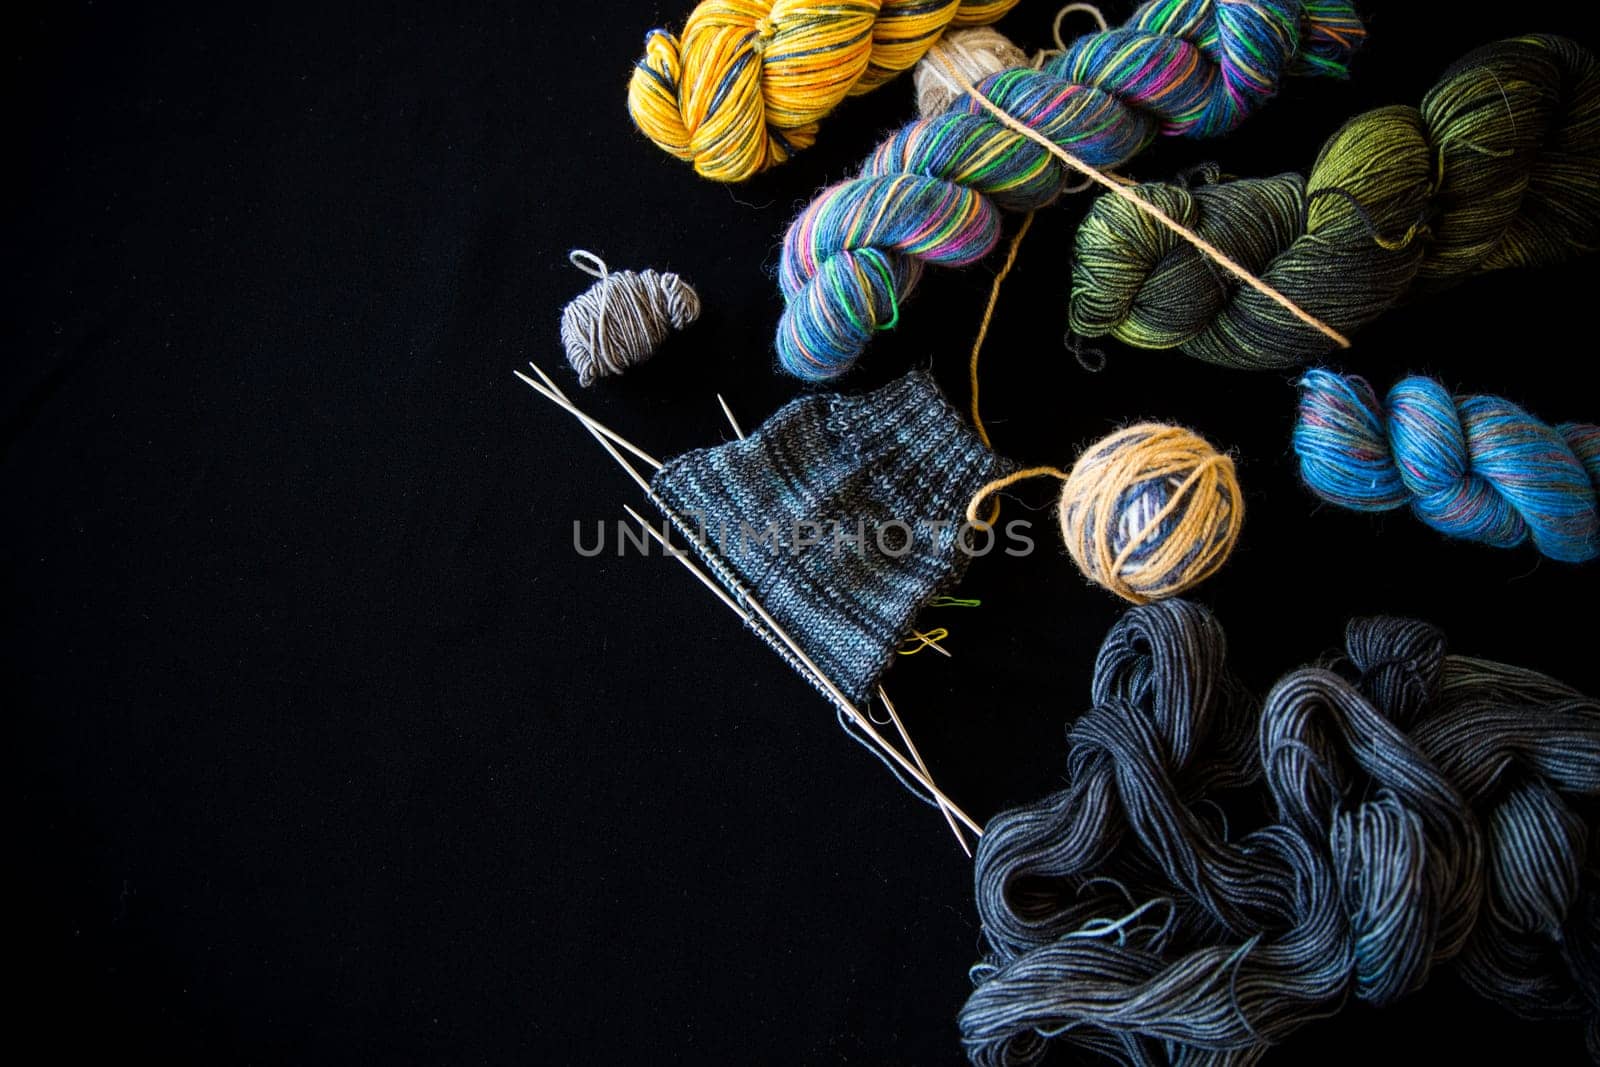 Colored threads, knitting needles and other items for hand knitting, on a black background .